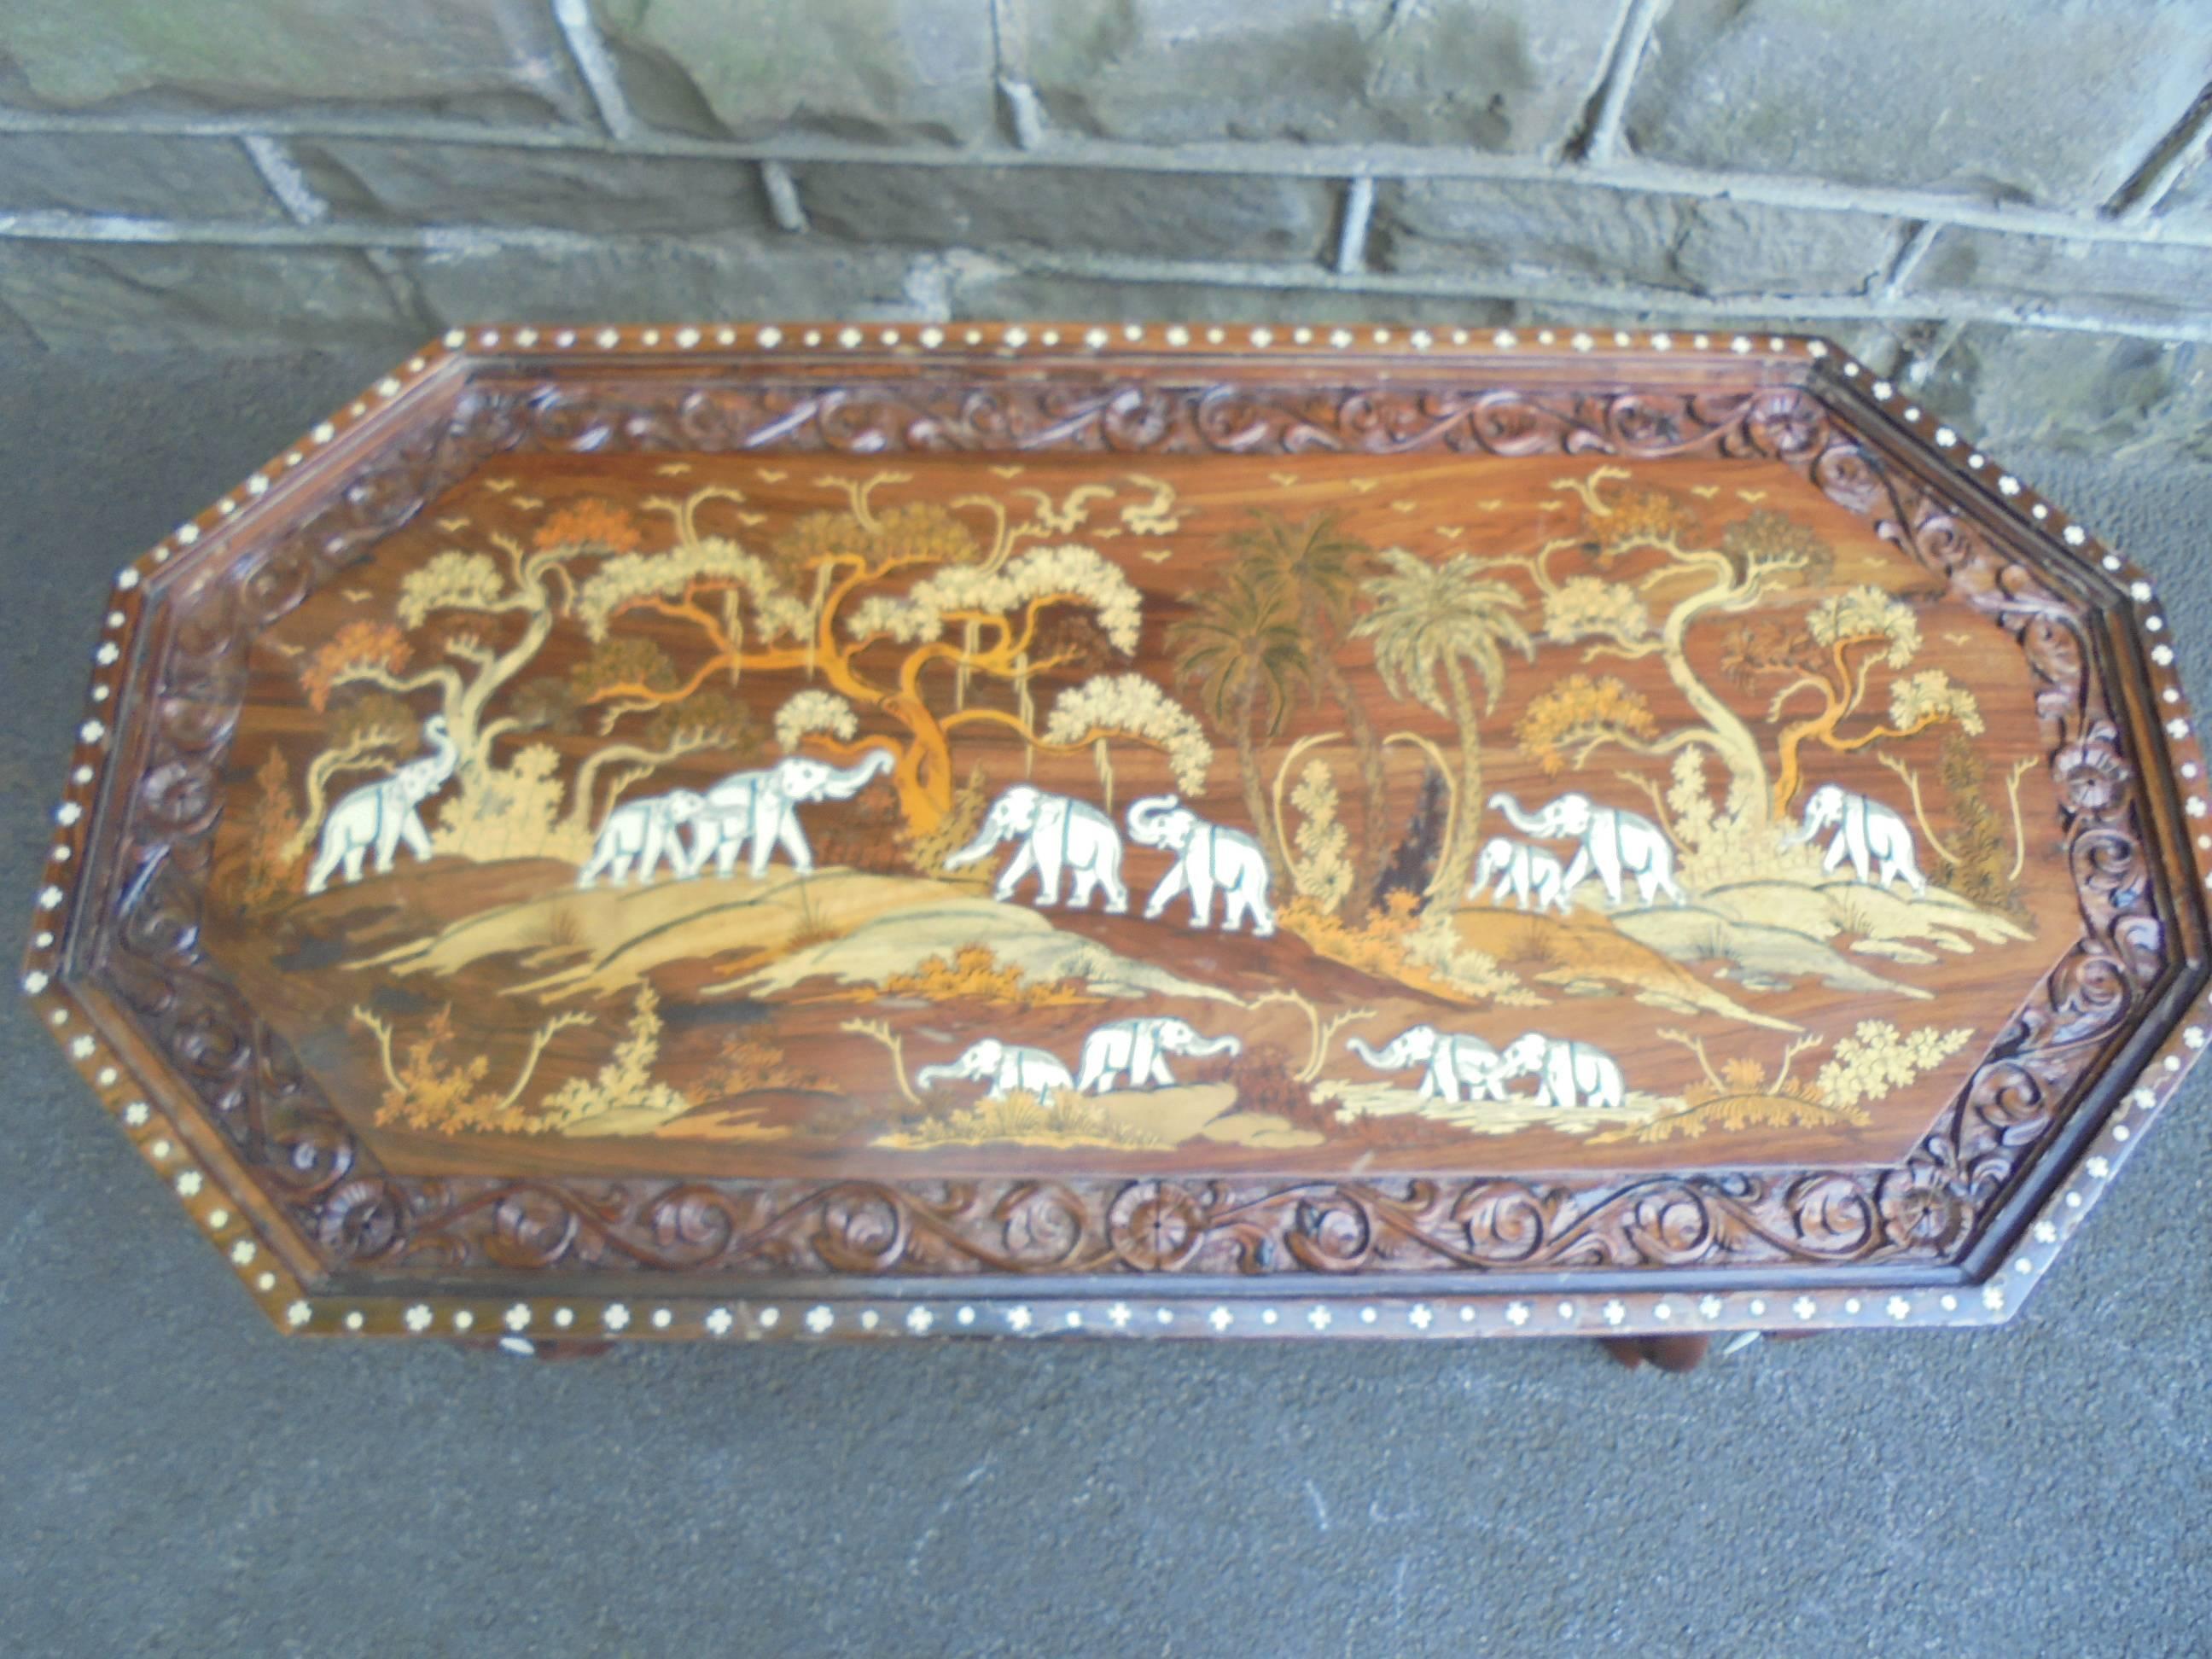 Offered for sale is this very decorative antique Anglo-Indian coffee table.

Dating from 1900-1910. Indian rosewood, inlaid decorative scene to the centre, ivory, boxwood, carved broder. Standing on ornate carved elephant legs with ivory tusks.